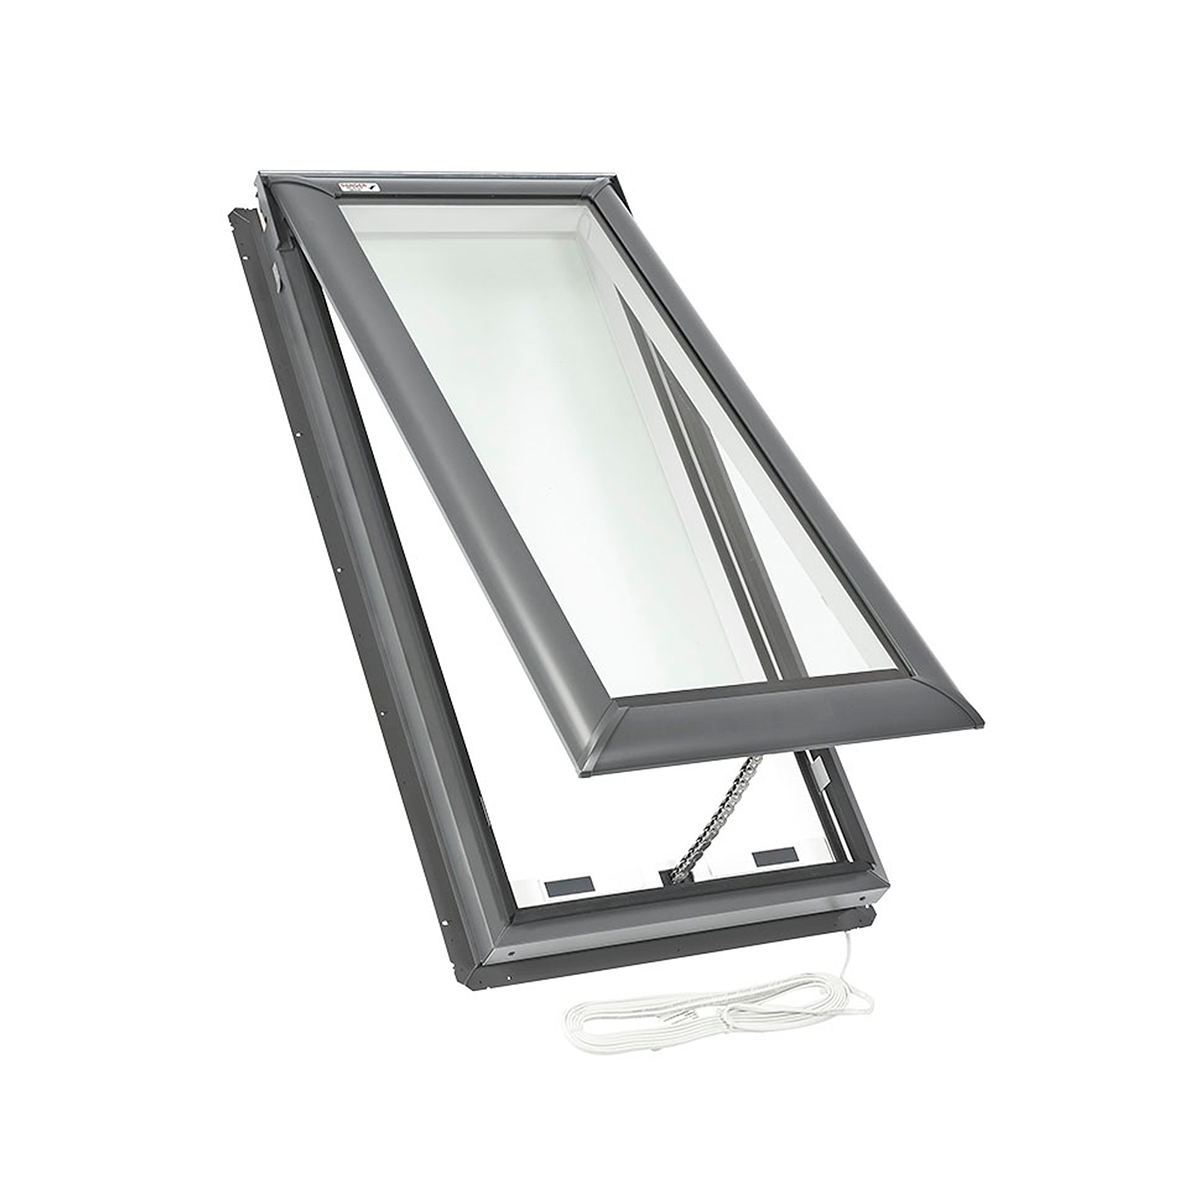 Electric Deck-Mount Skylight with Laminated Low-E3 Glass - 30-1/16 in. x 37-7/8 in. - VSE M04